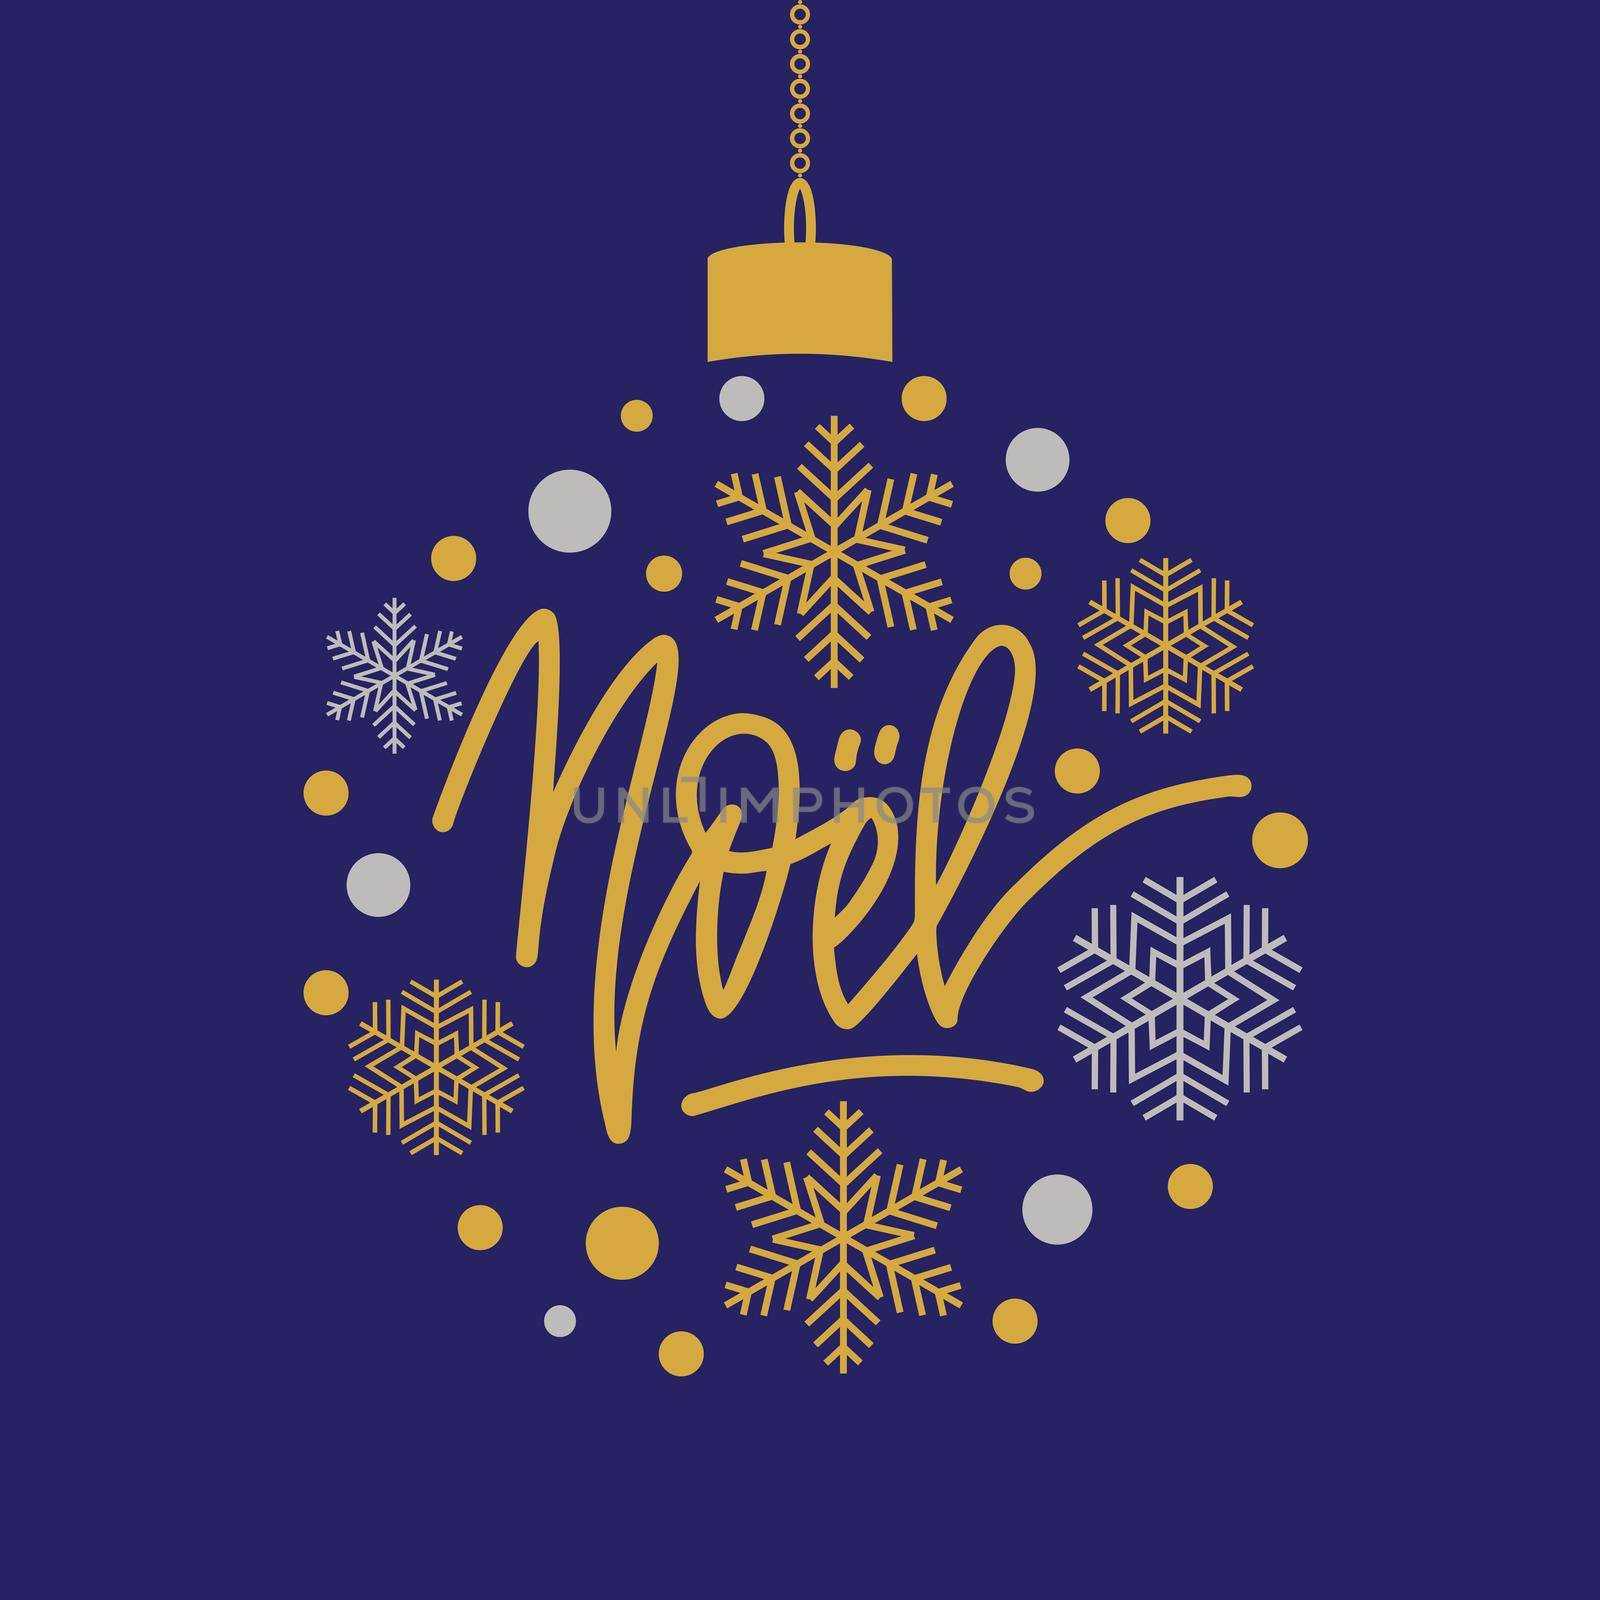 Christmas in French greeting. Noel. Handwritten lettering with snowflakes in Christmas ball. illustration for greeting cards, posters and much more by Marin4ik